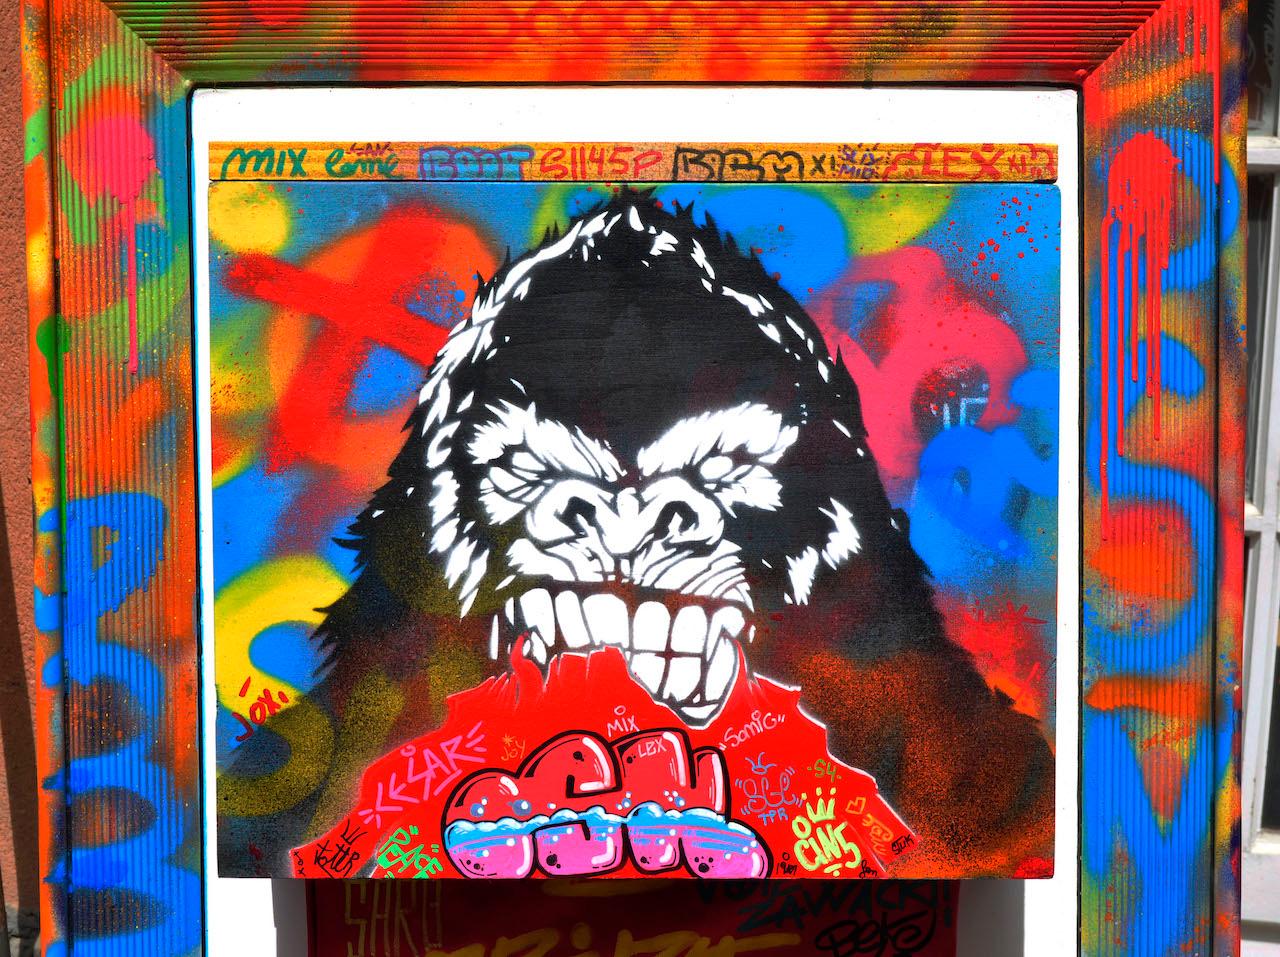 Artist: Alberto Blanchart
Gorilla
Technique: Graffiti 
Material: Acrylic paint on canvas mounted on a wooden support 
Size: 100 cm x 70 cm x 4 cm 
signature and artist's certificate

Selling price: 400 euros